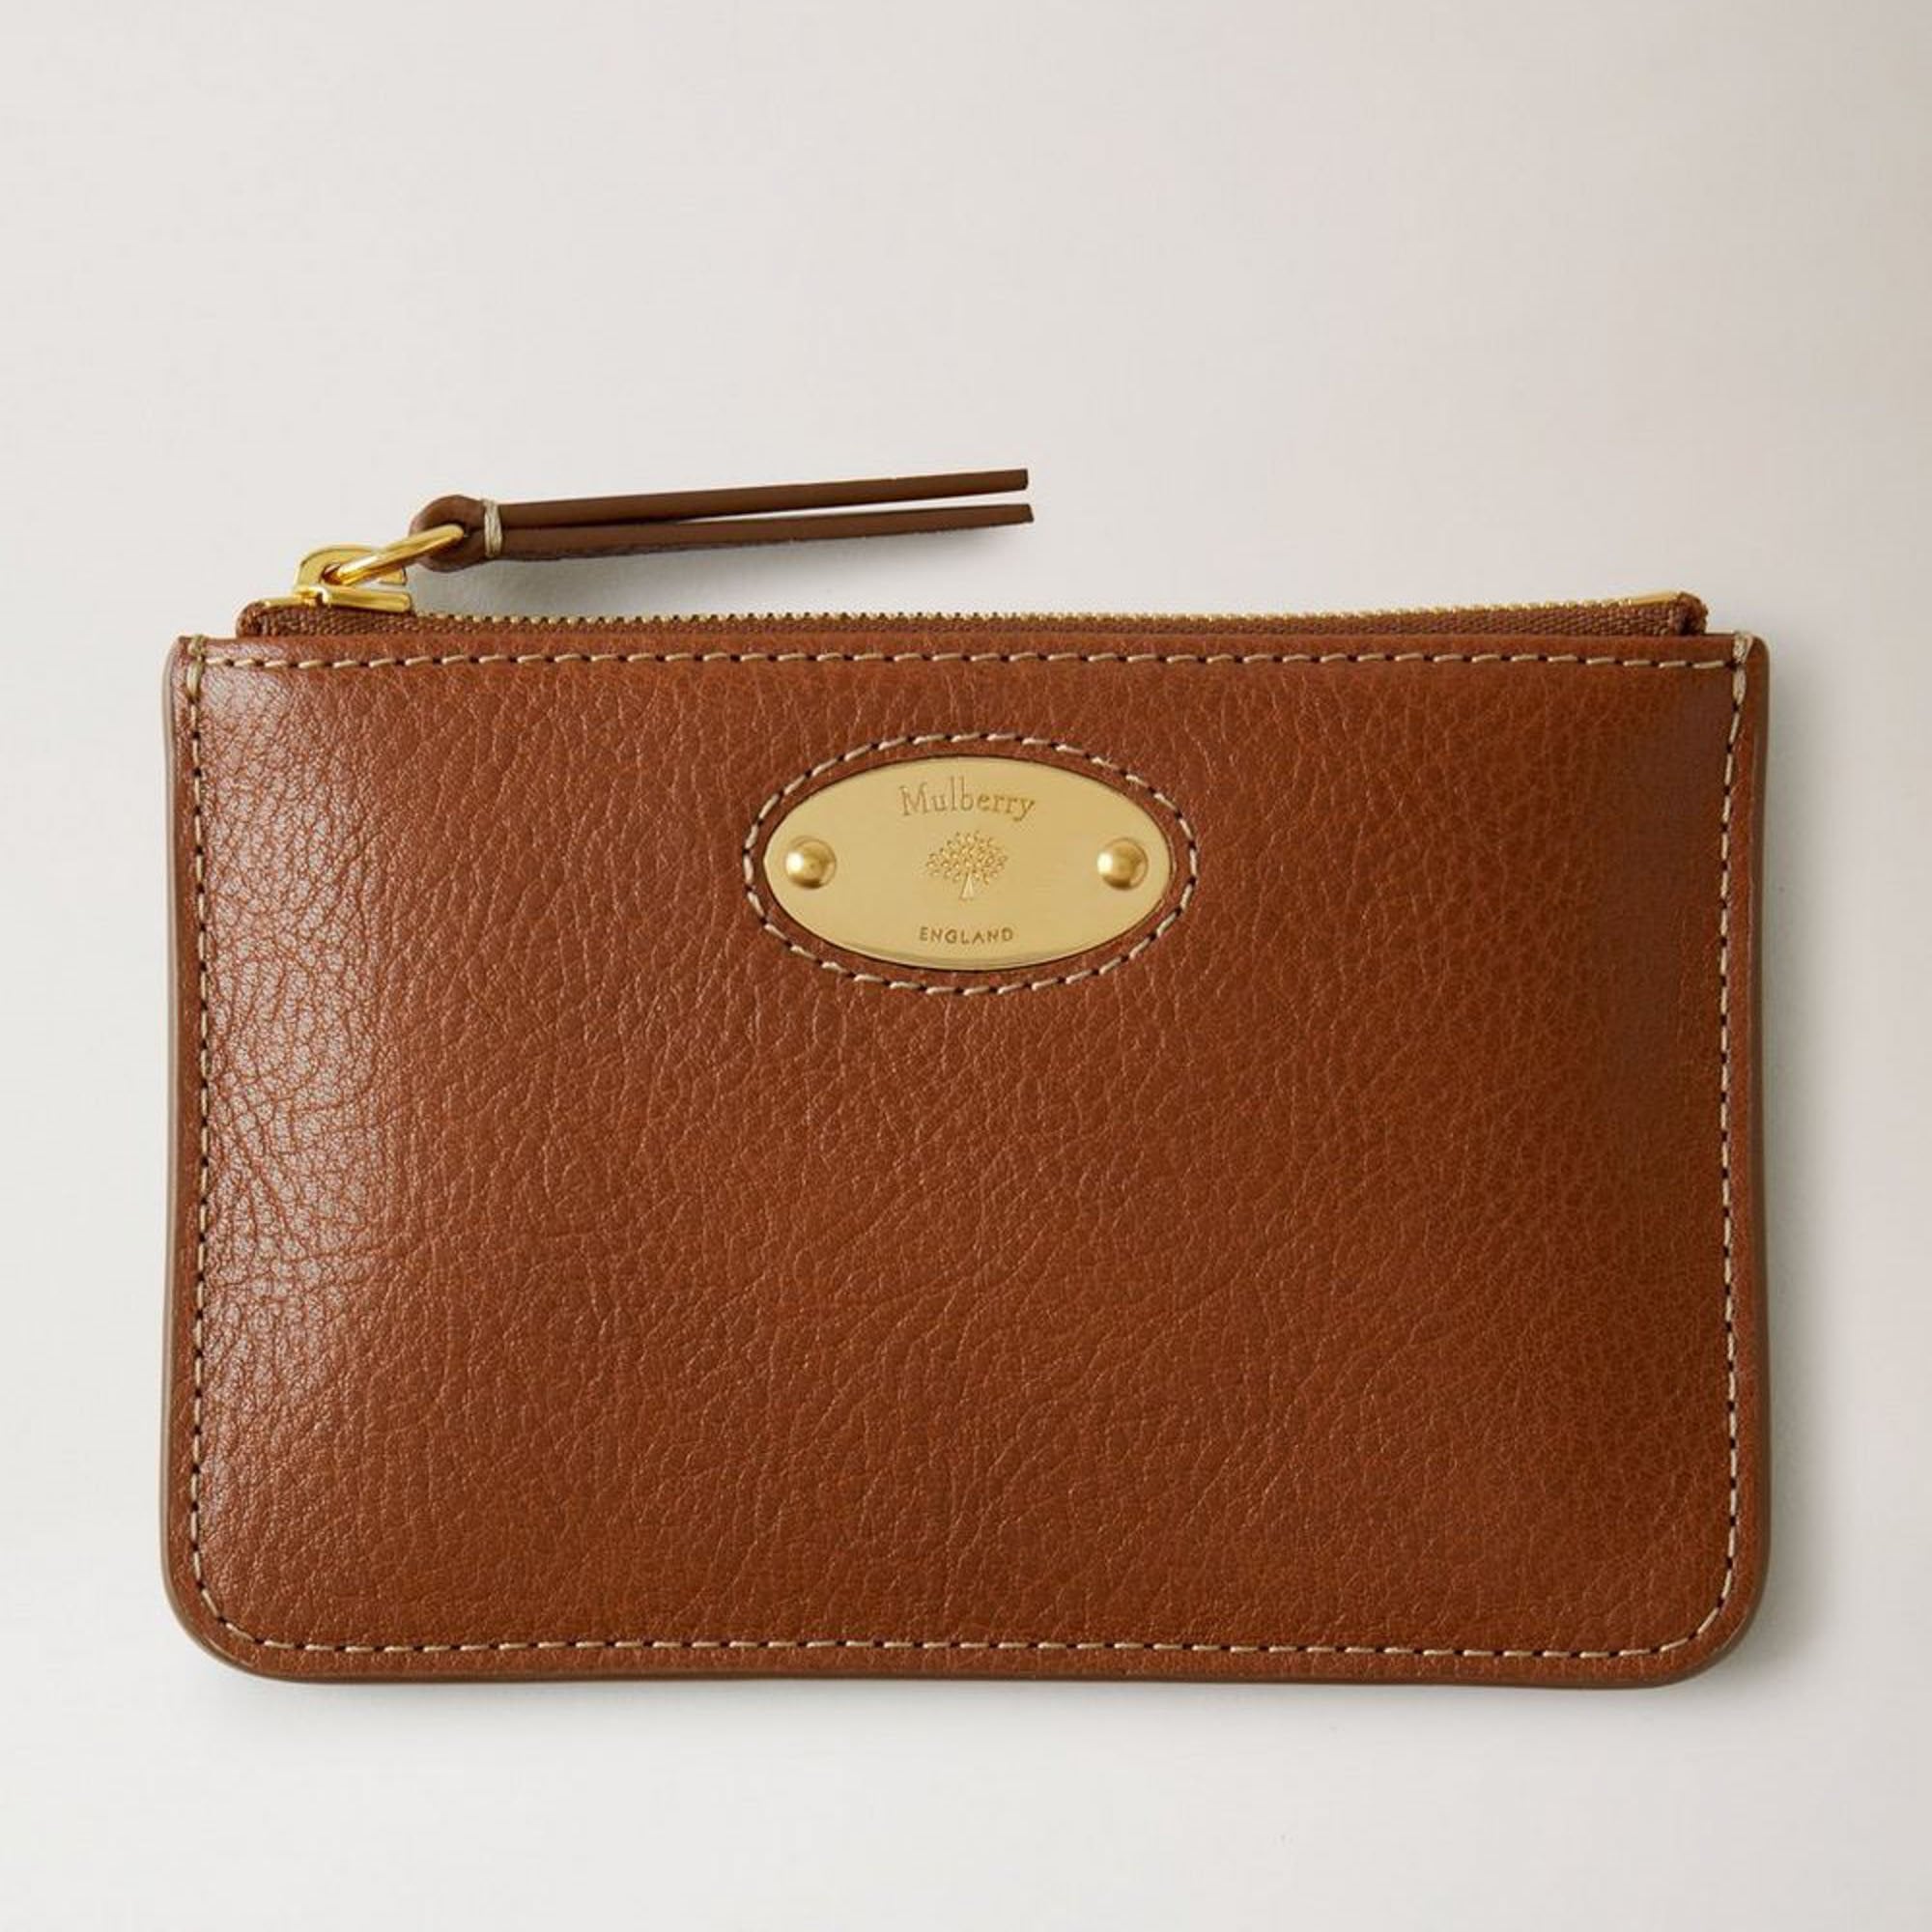 The Mulberry Small Darley in Black Classic Grain Leather